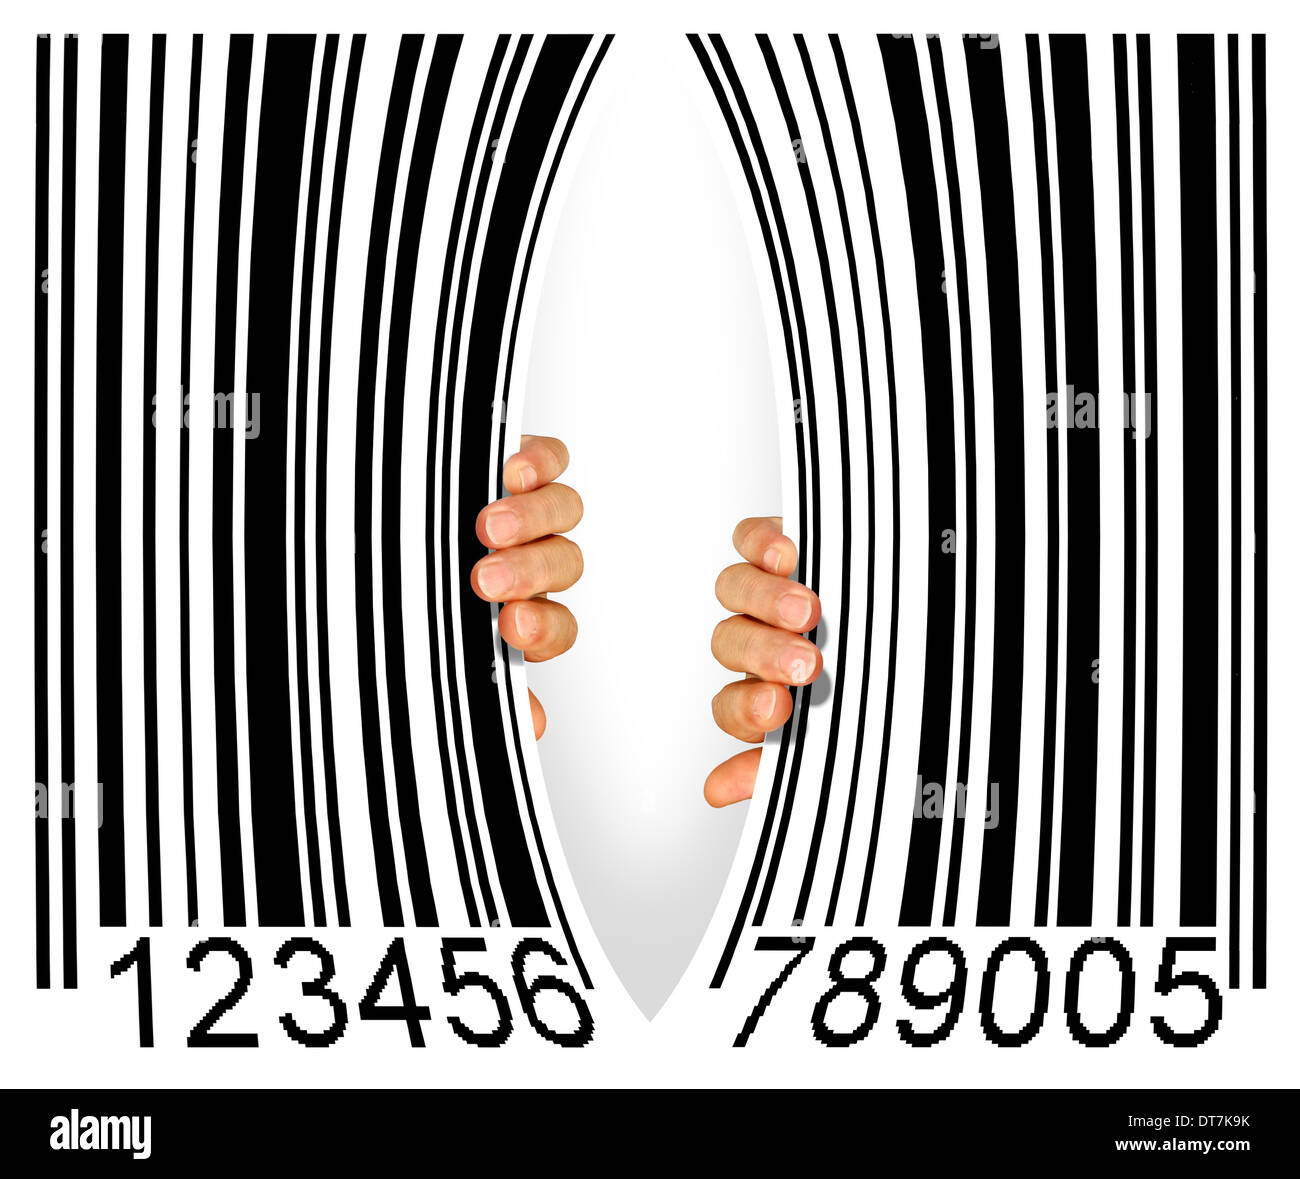 Big bar code torn apart in the middle by two hands - Consumerism concept Stock Photo